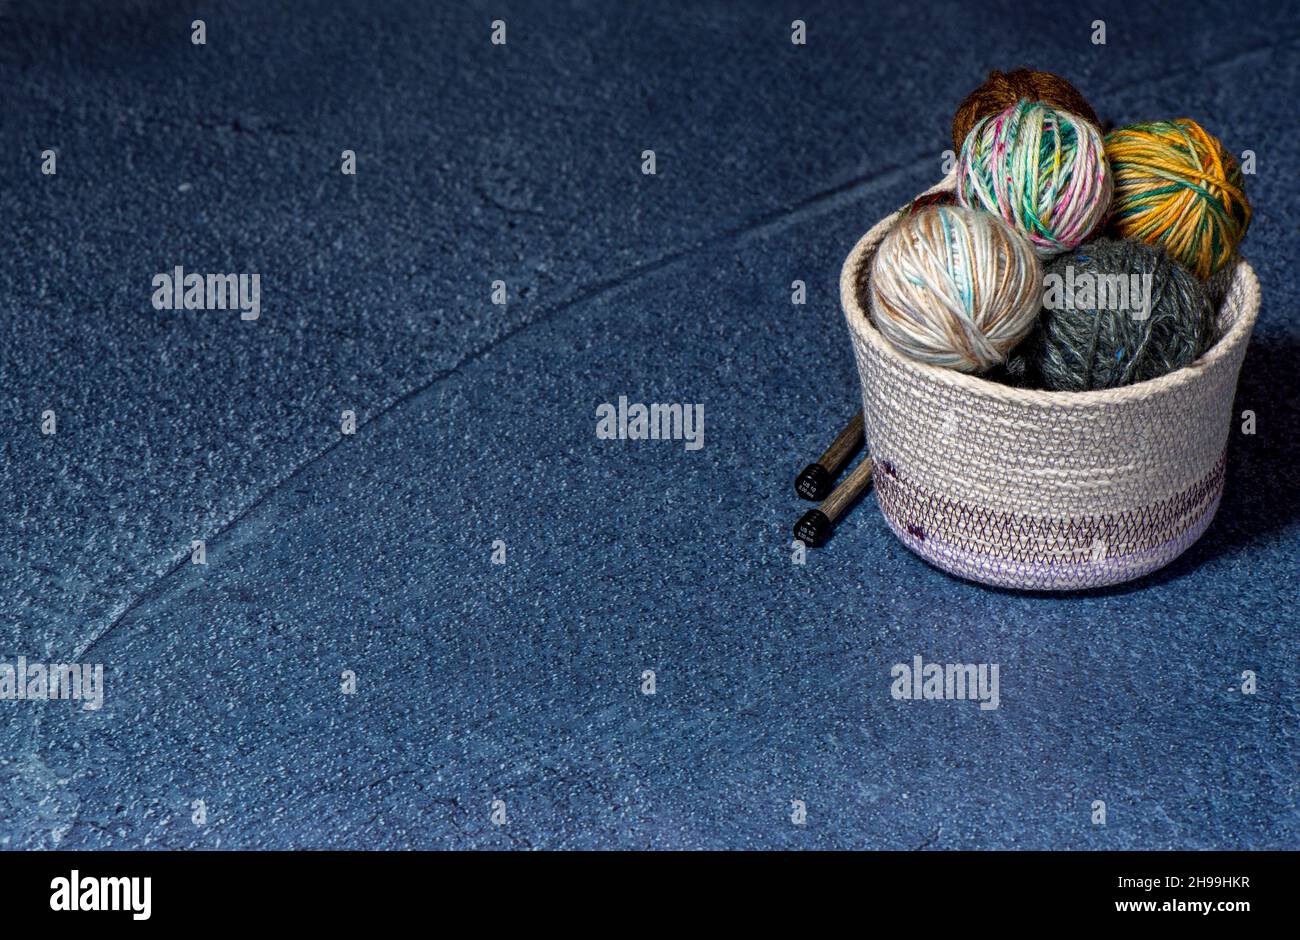 Skeins of yarn knitting needles in a beige fabric bowl and blue background Stock Photo